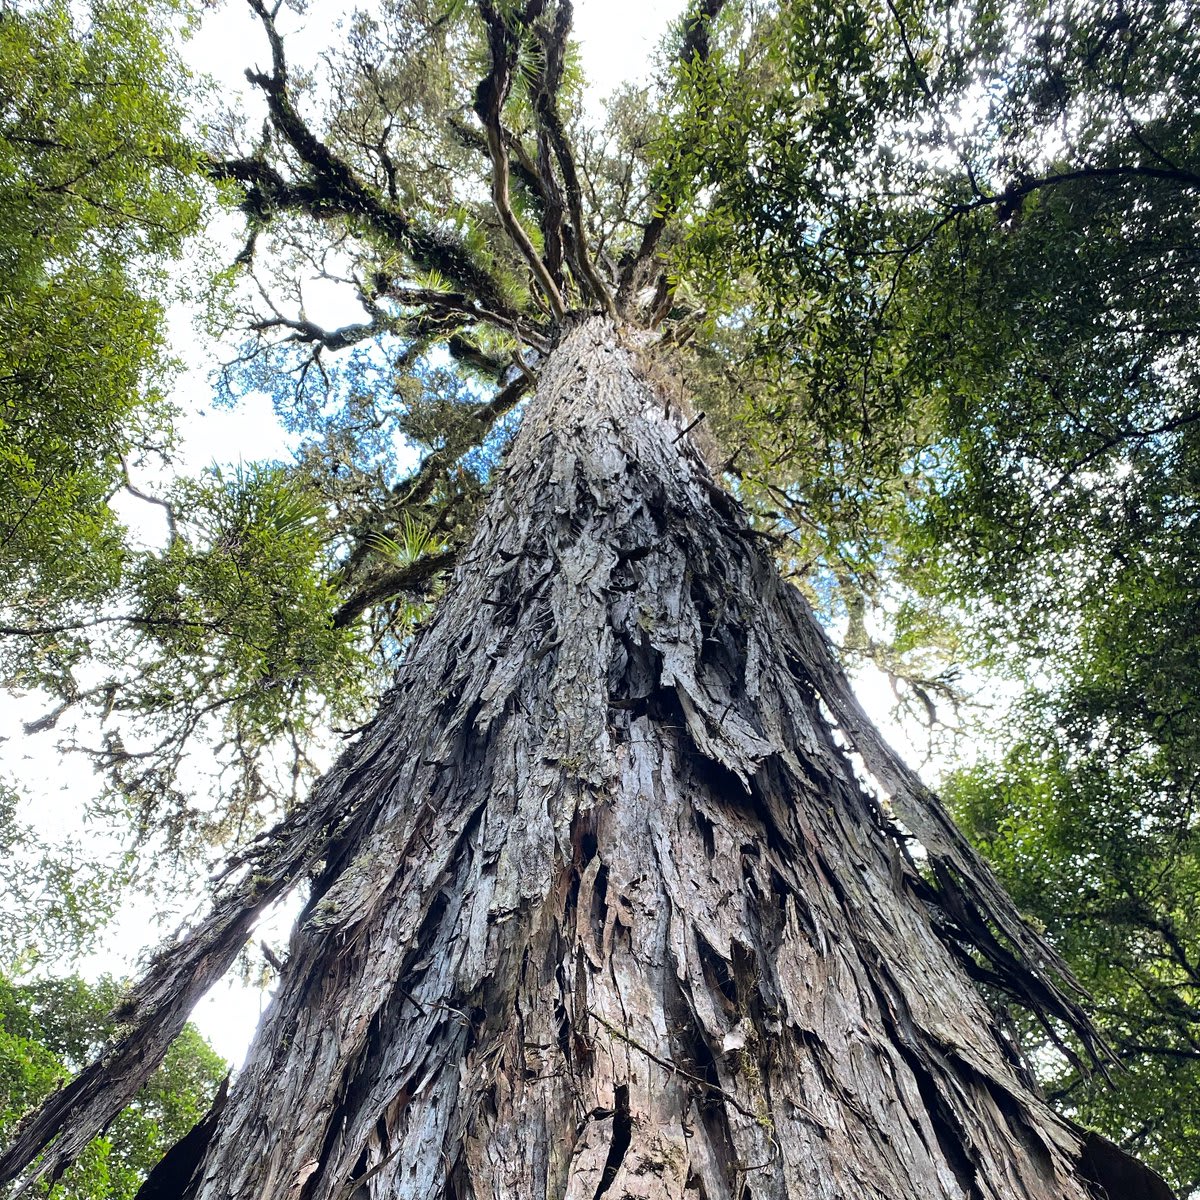 + : George McKenzie Jr (IG // georgemckenziejr) : Whirinaki Te Pua-a-Tane Conservation Park This Totara Tree is over 1000 years old and it symbolizes life and growth to the indigenous Maori community.